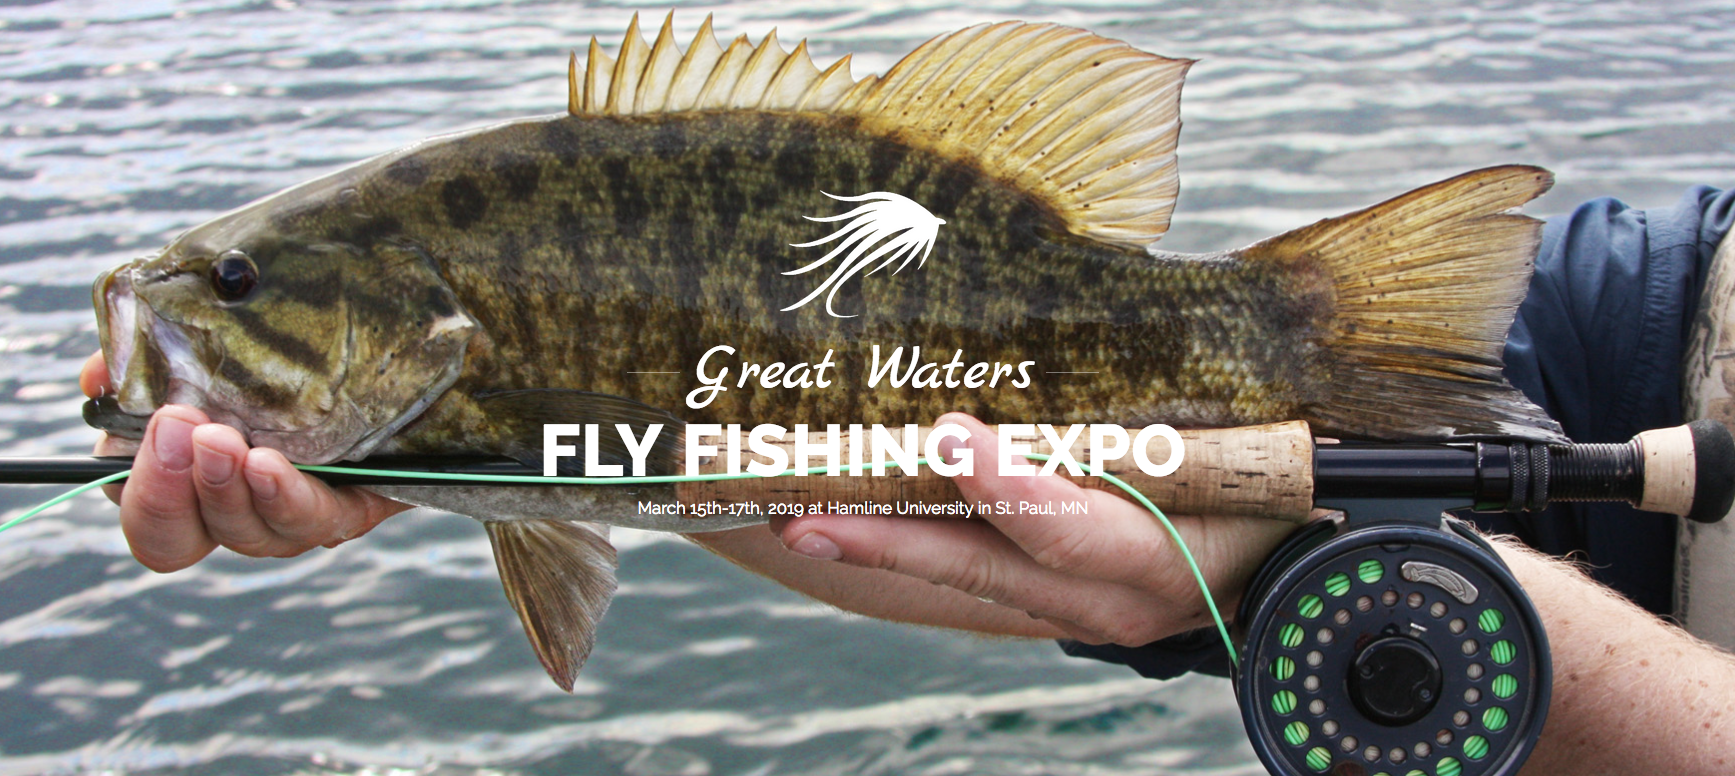 Great Waters Fly Fishing Expo 2019